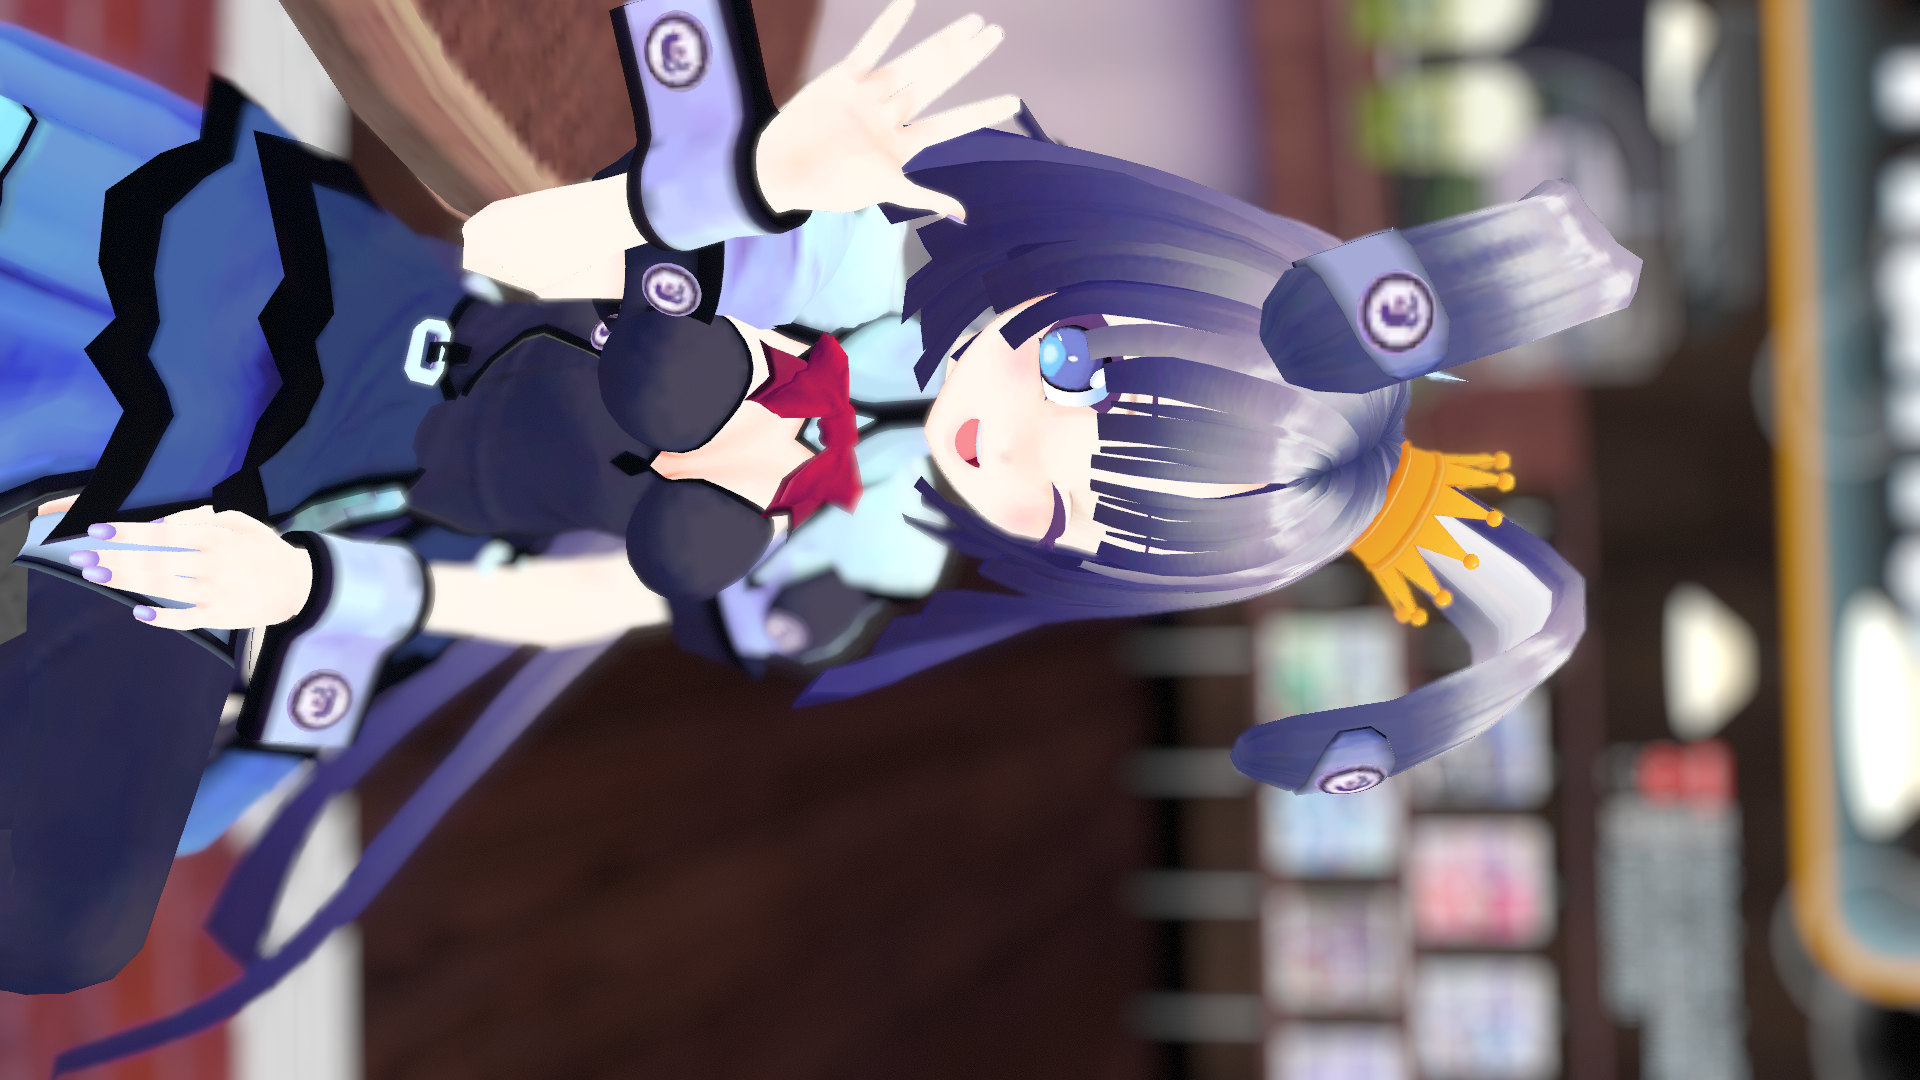 VRChat_1920x1080_2021-12-05_06-01-33.930.png